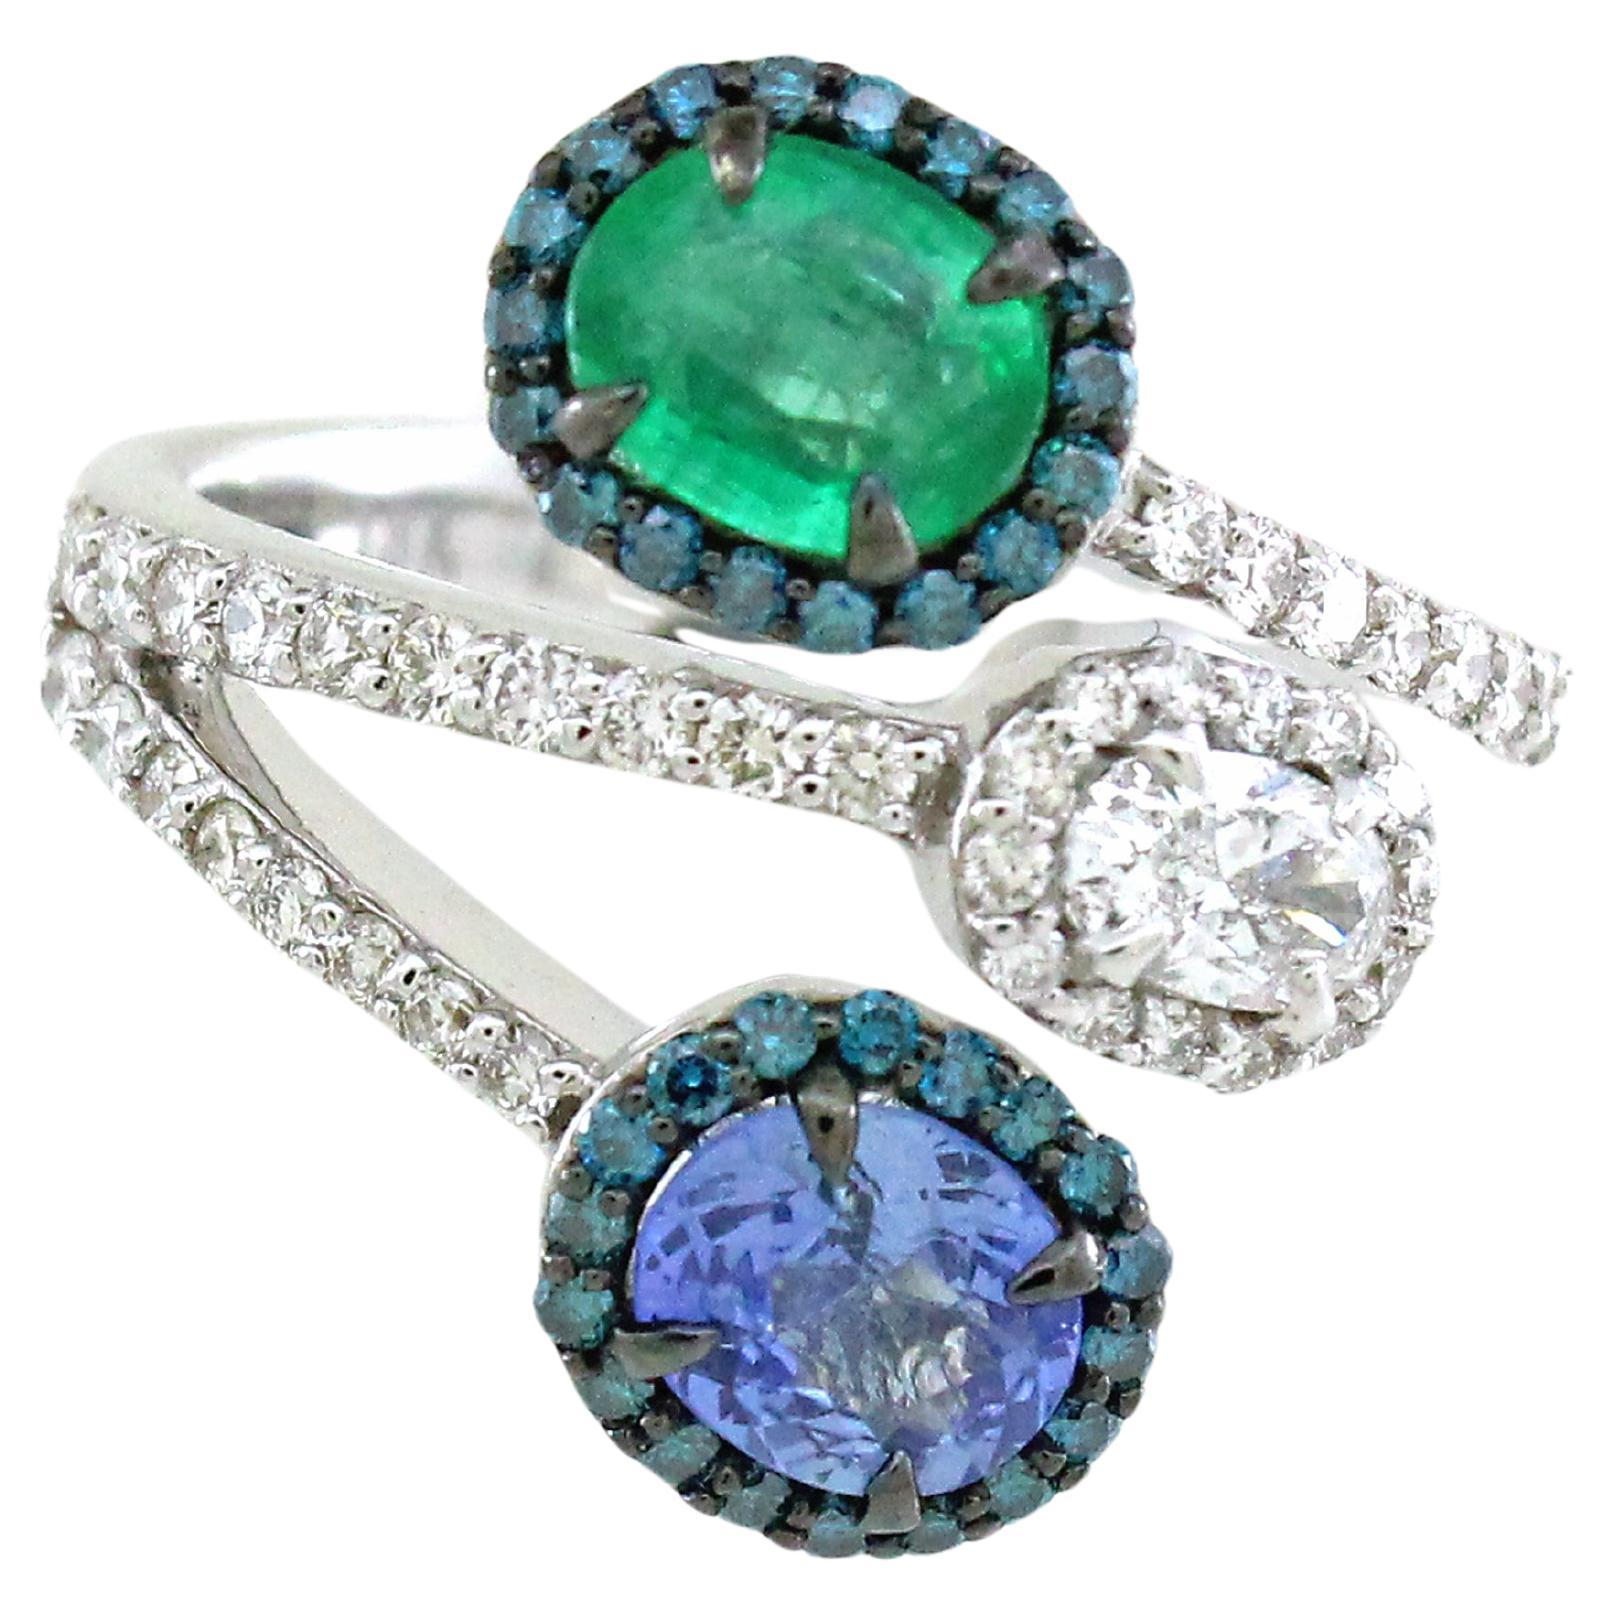 0.72 Cts Emerald and 0.66 Cts Tanzanite Ring For Sale